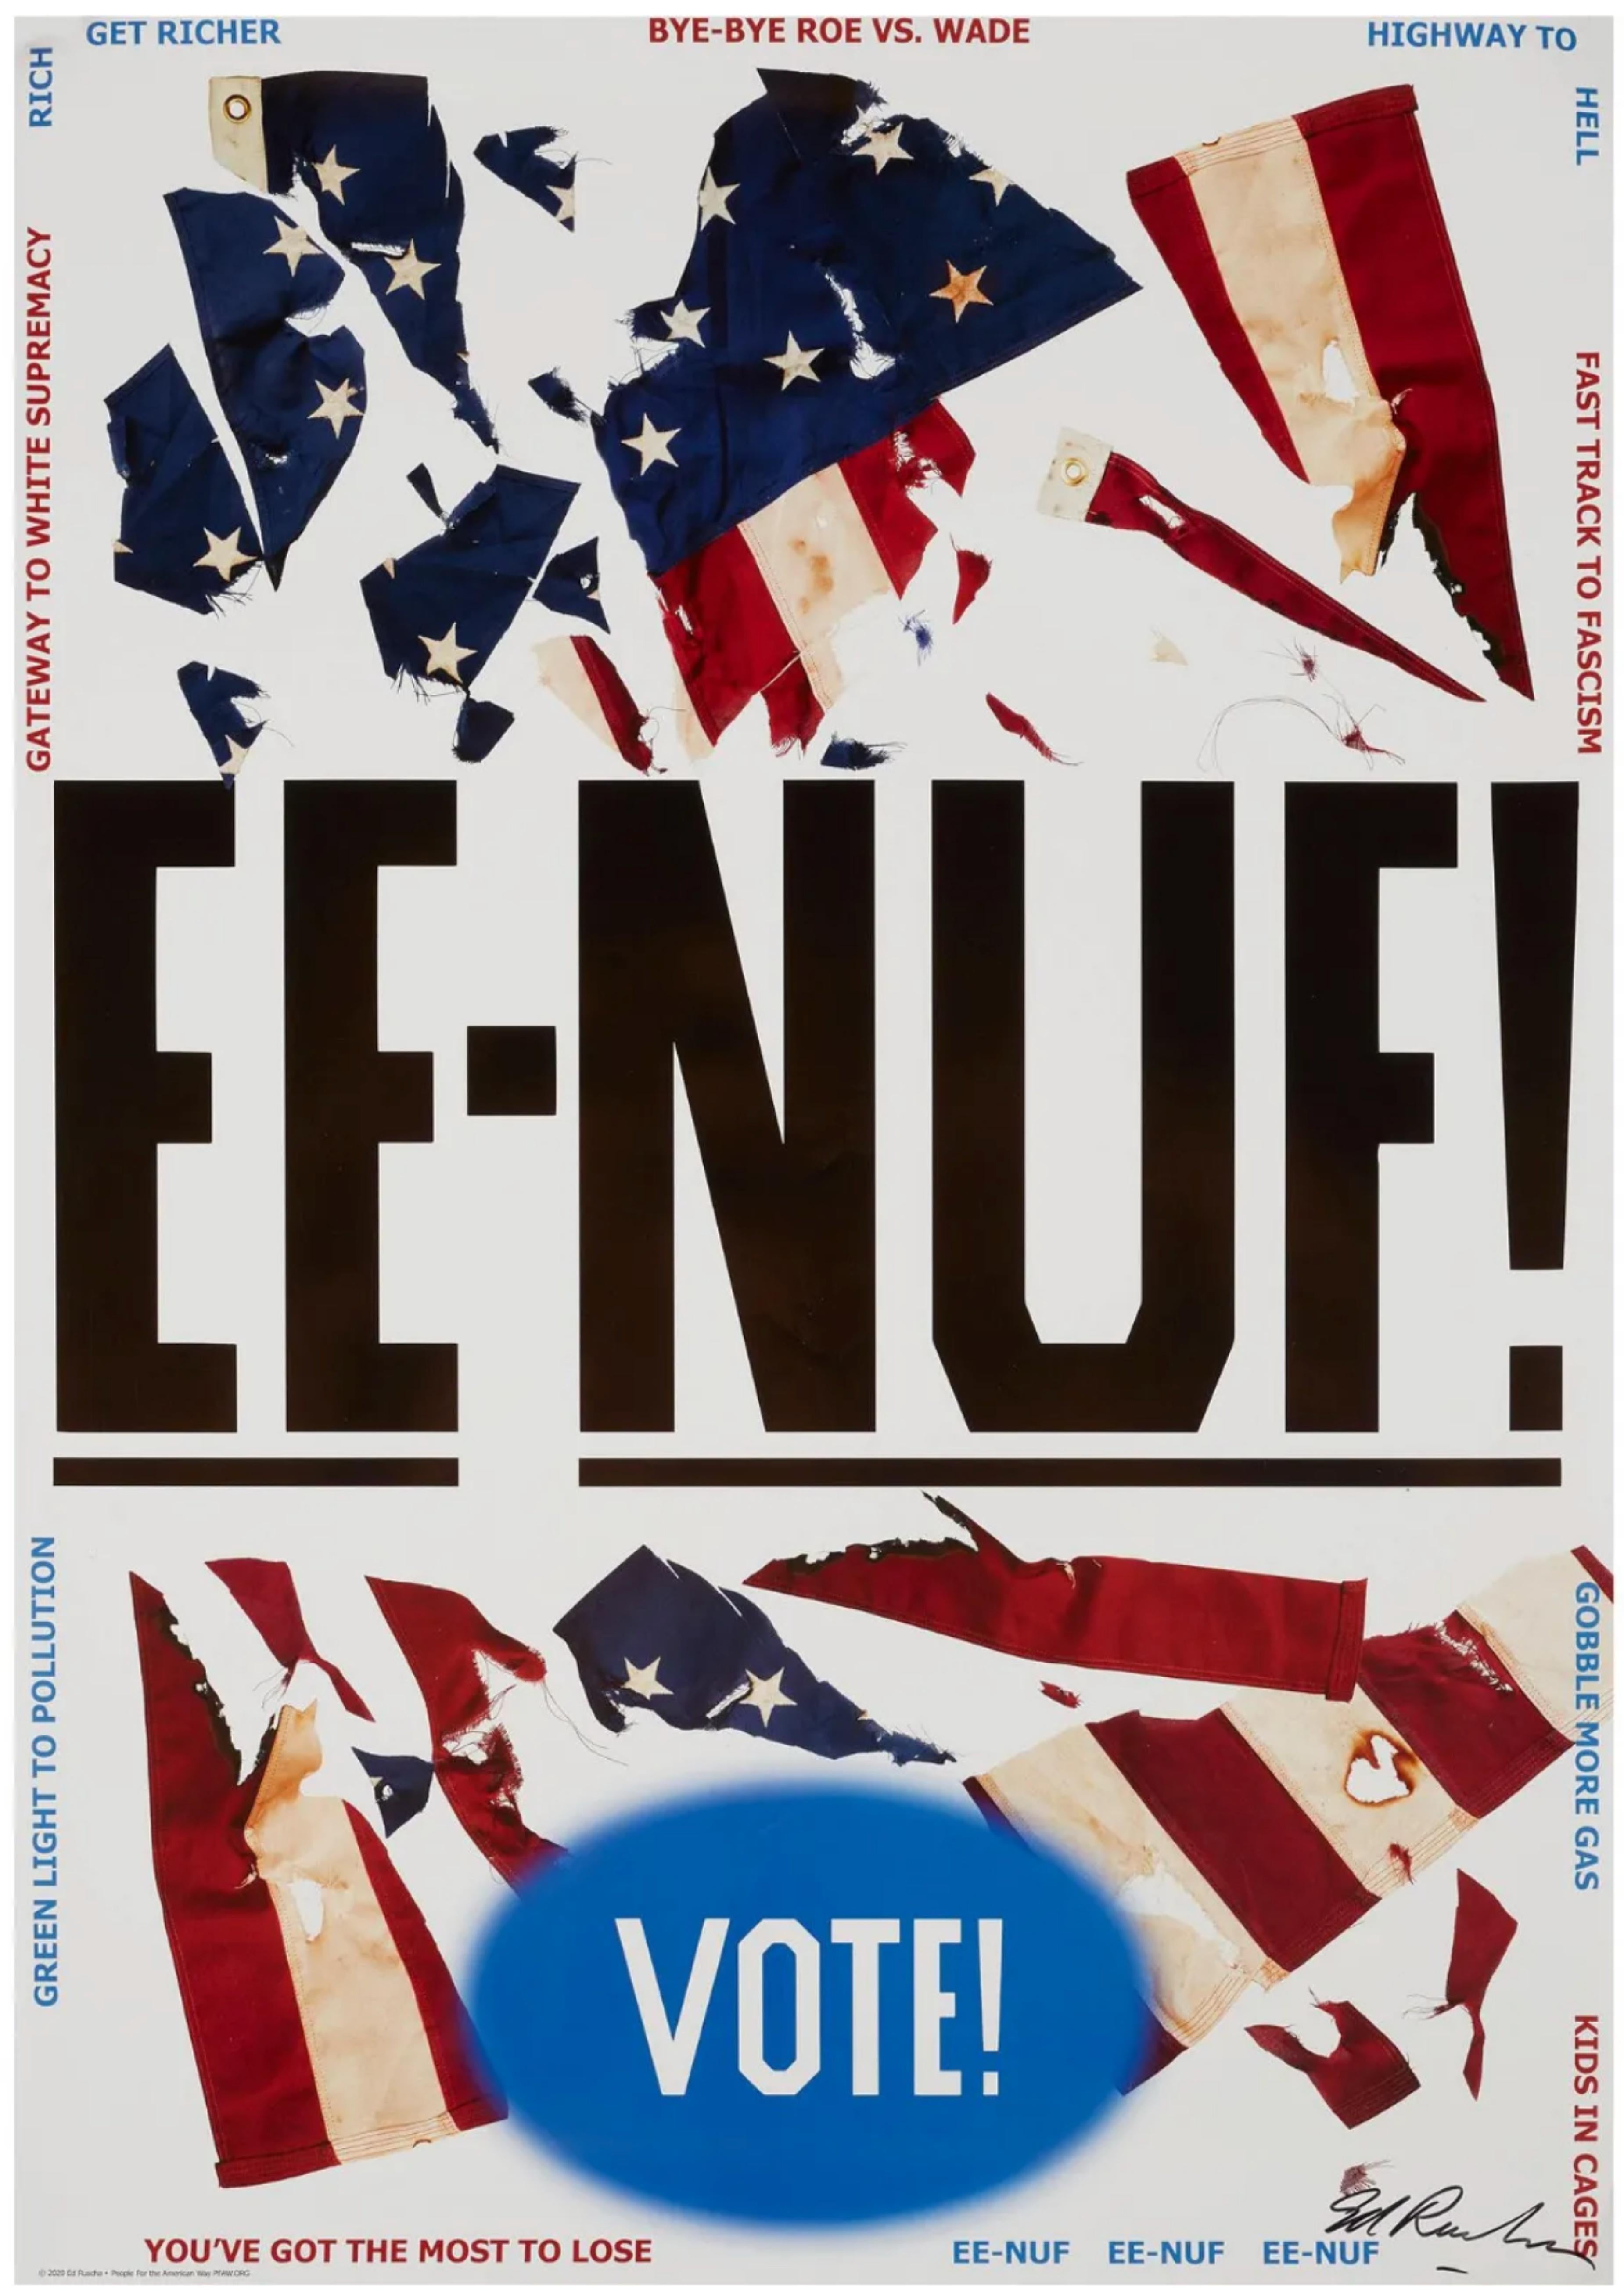 EE-NUF! Enough of Donald Trump: VOTE political poster (Hand Signed by Ed Ruscha)